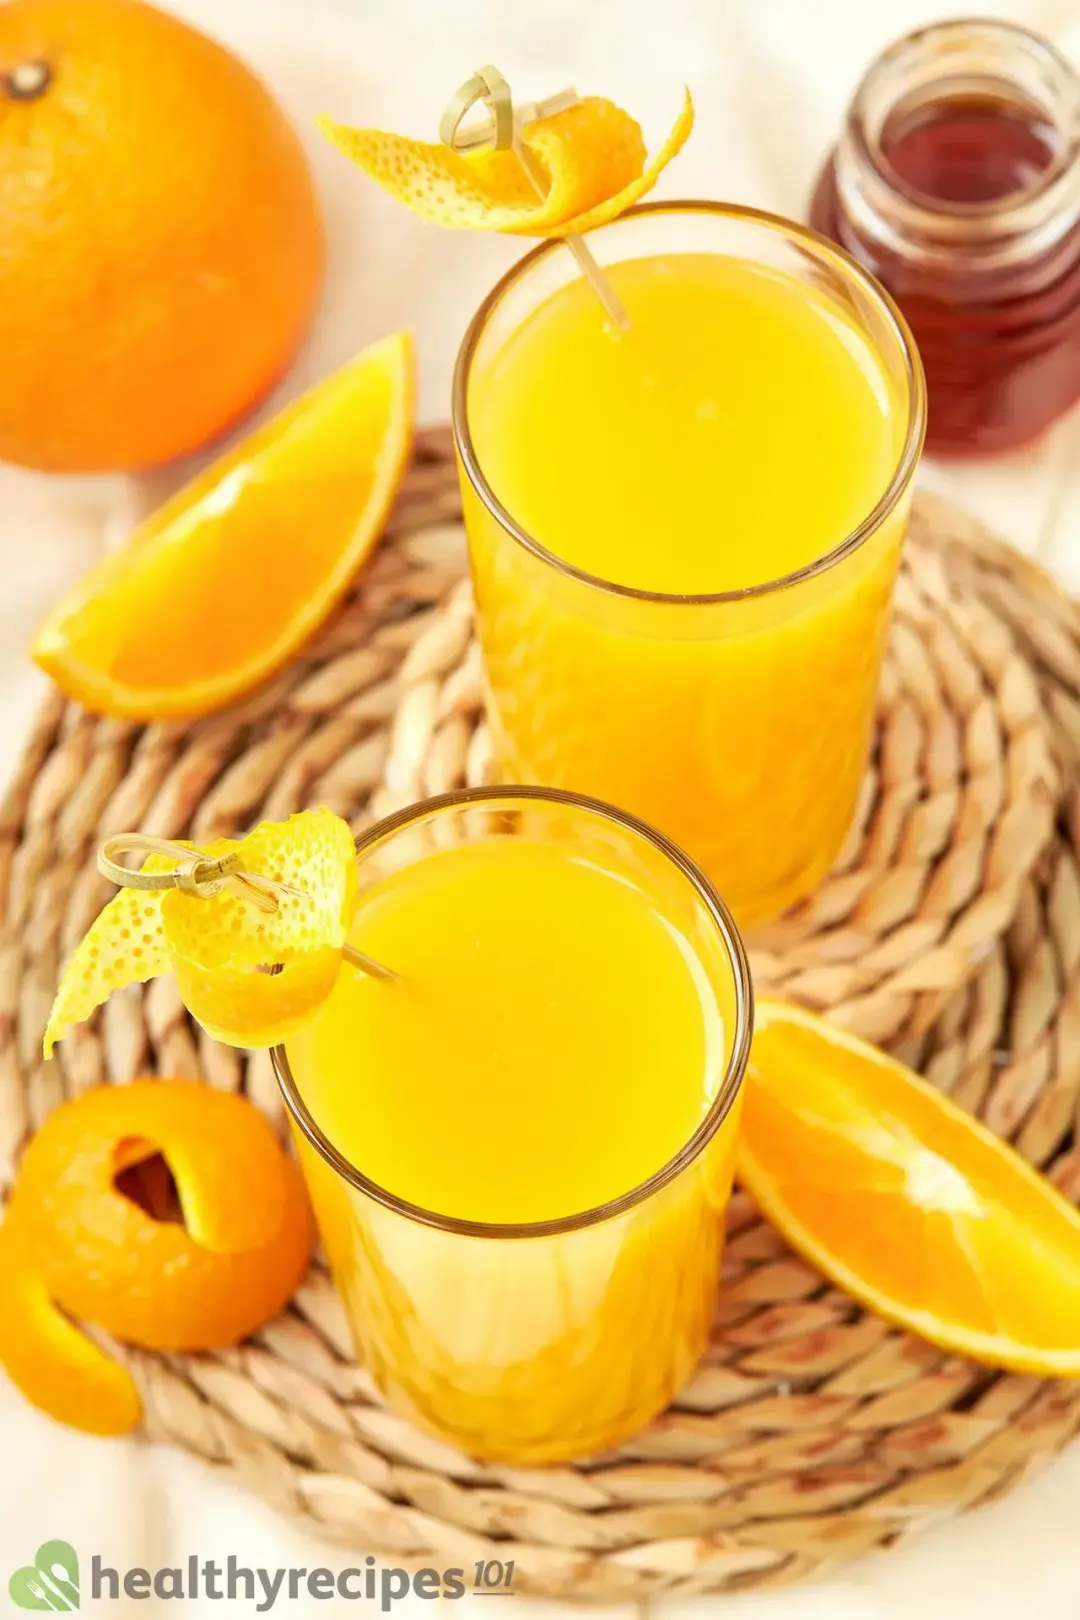 Two glasses of orange juice on a wood-colored coaster along with orange wedges